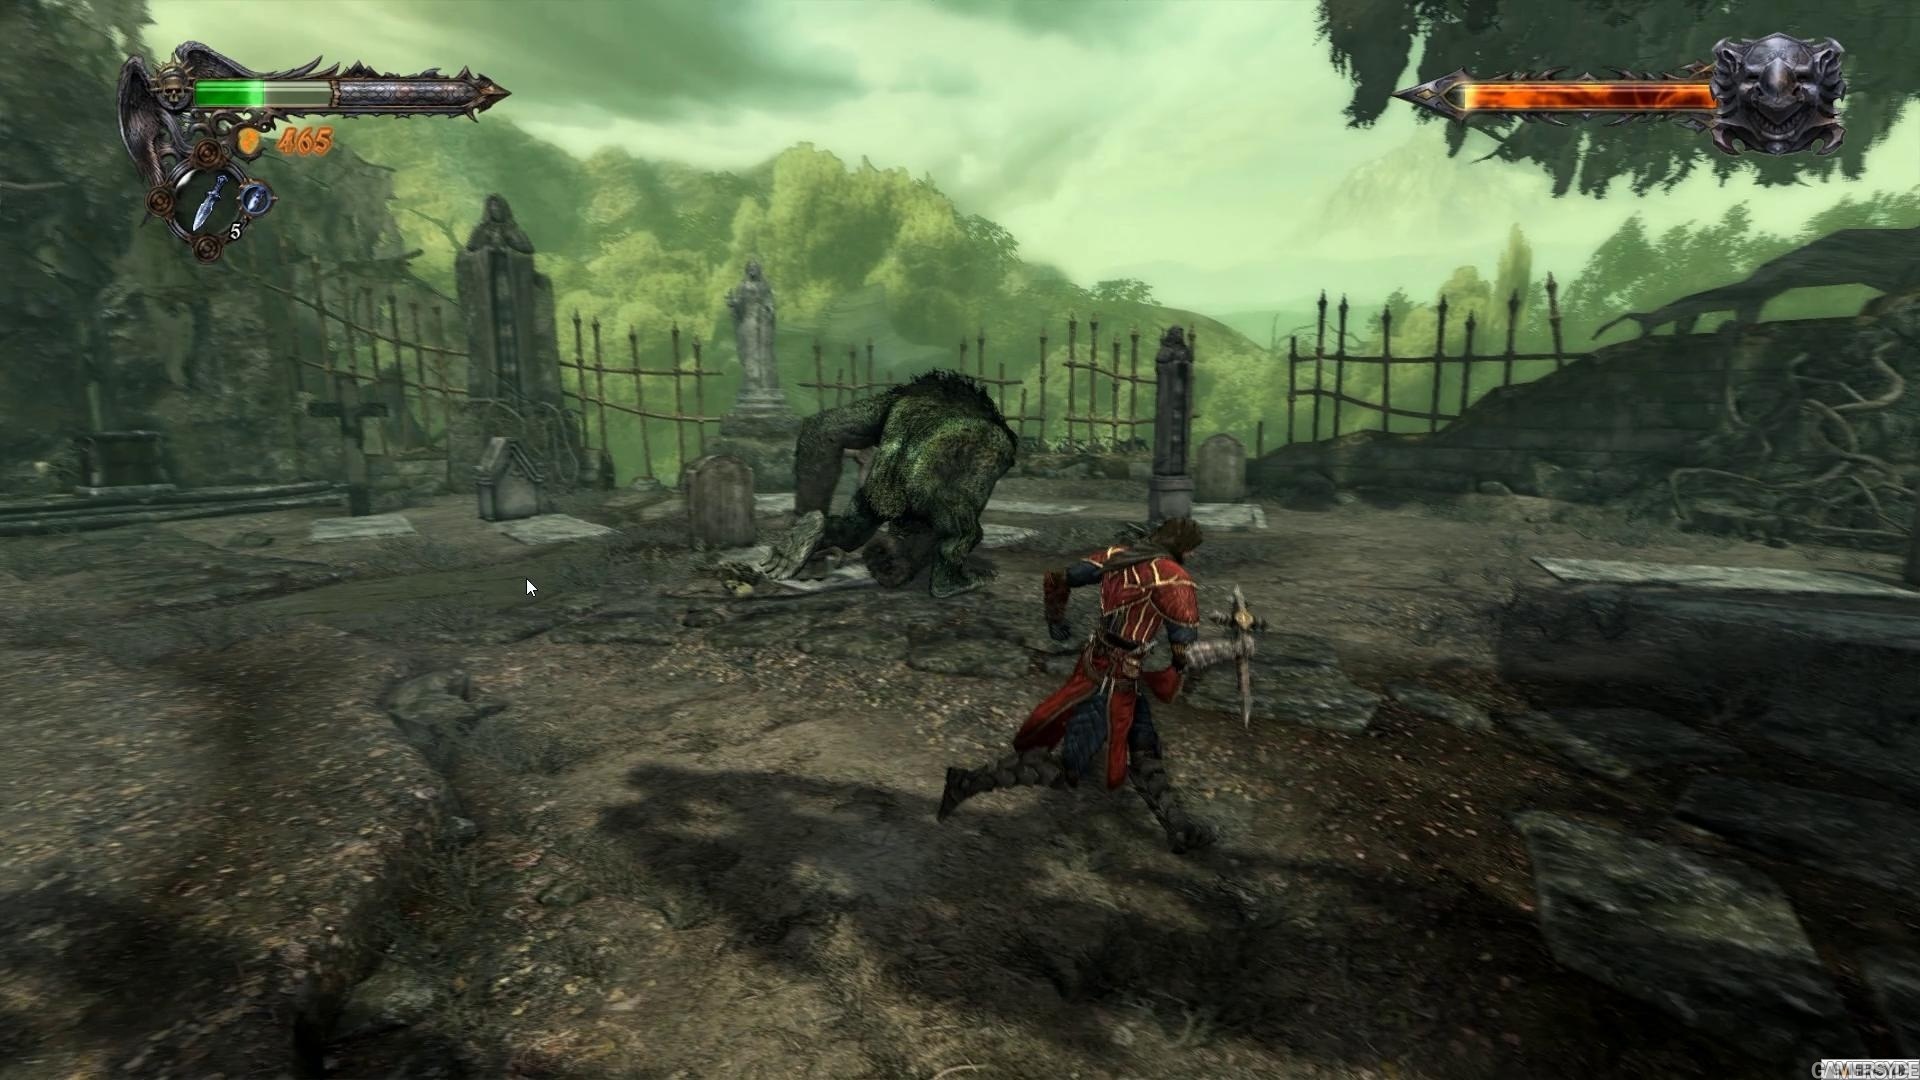 Castlevania: Lords of Shadow: Gameplay Trailer 